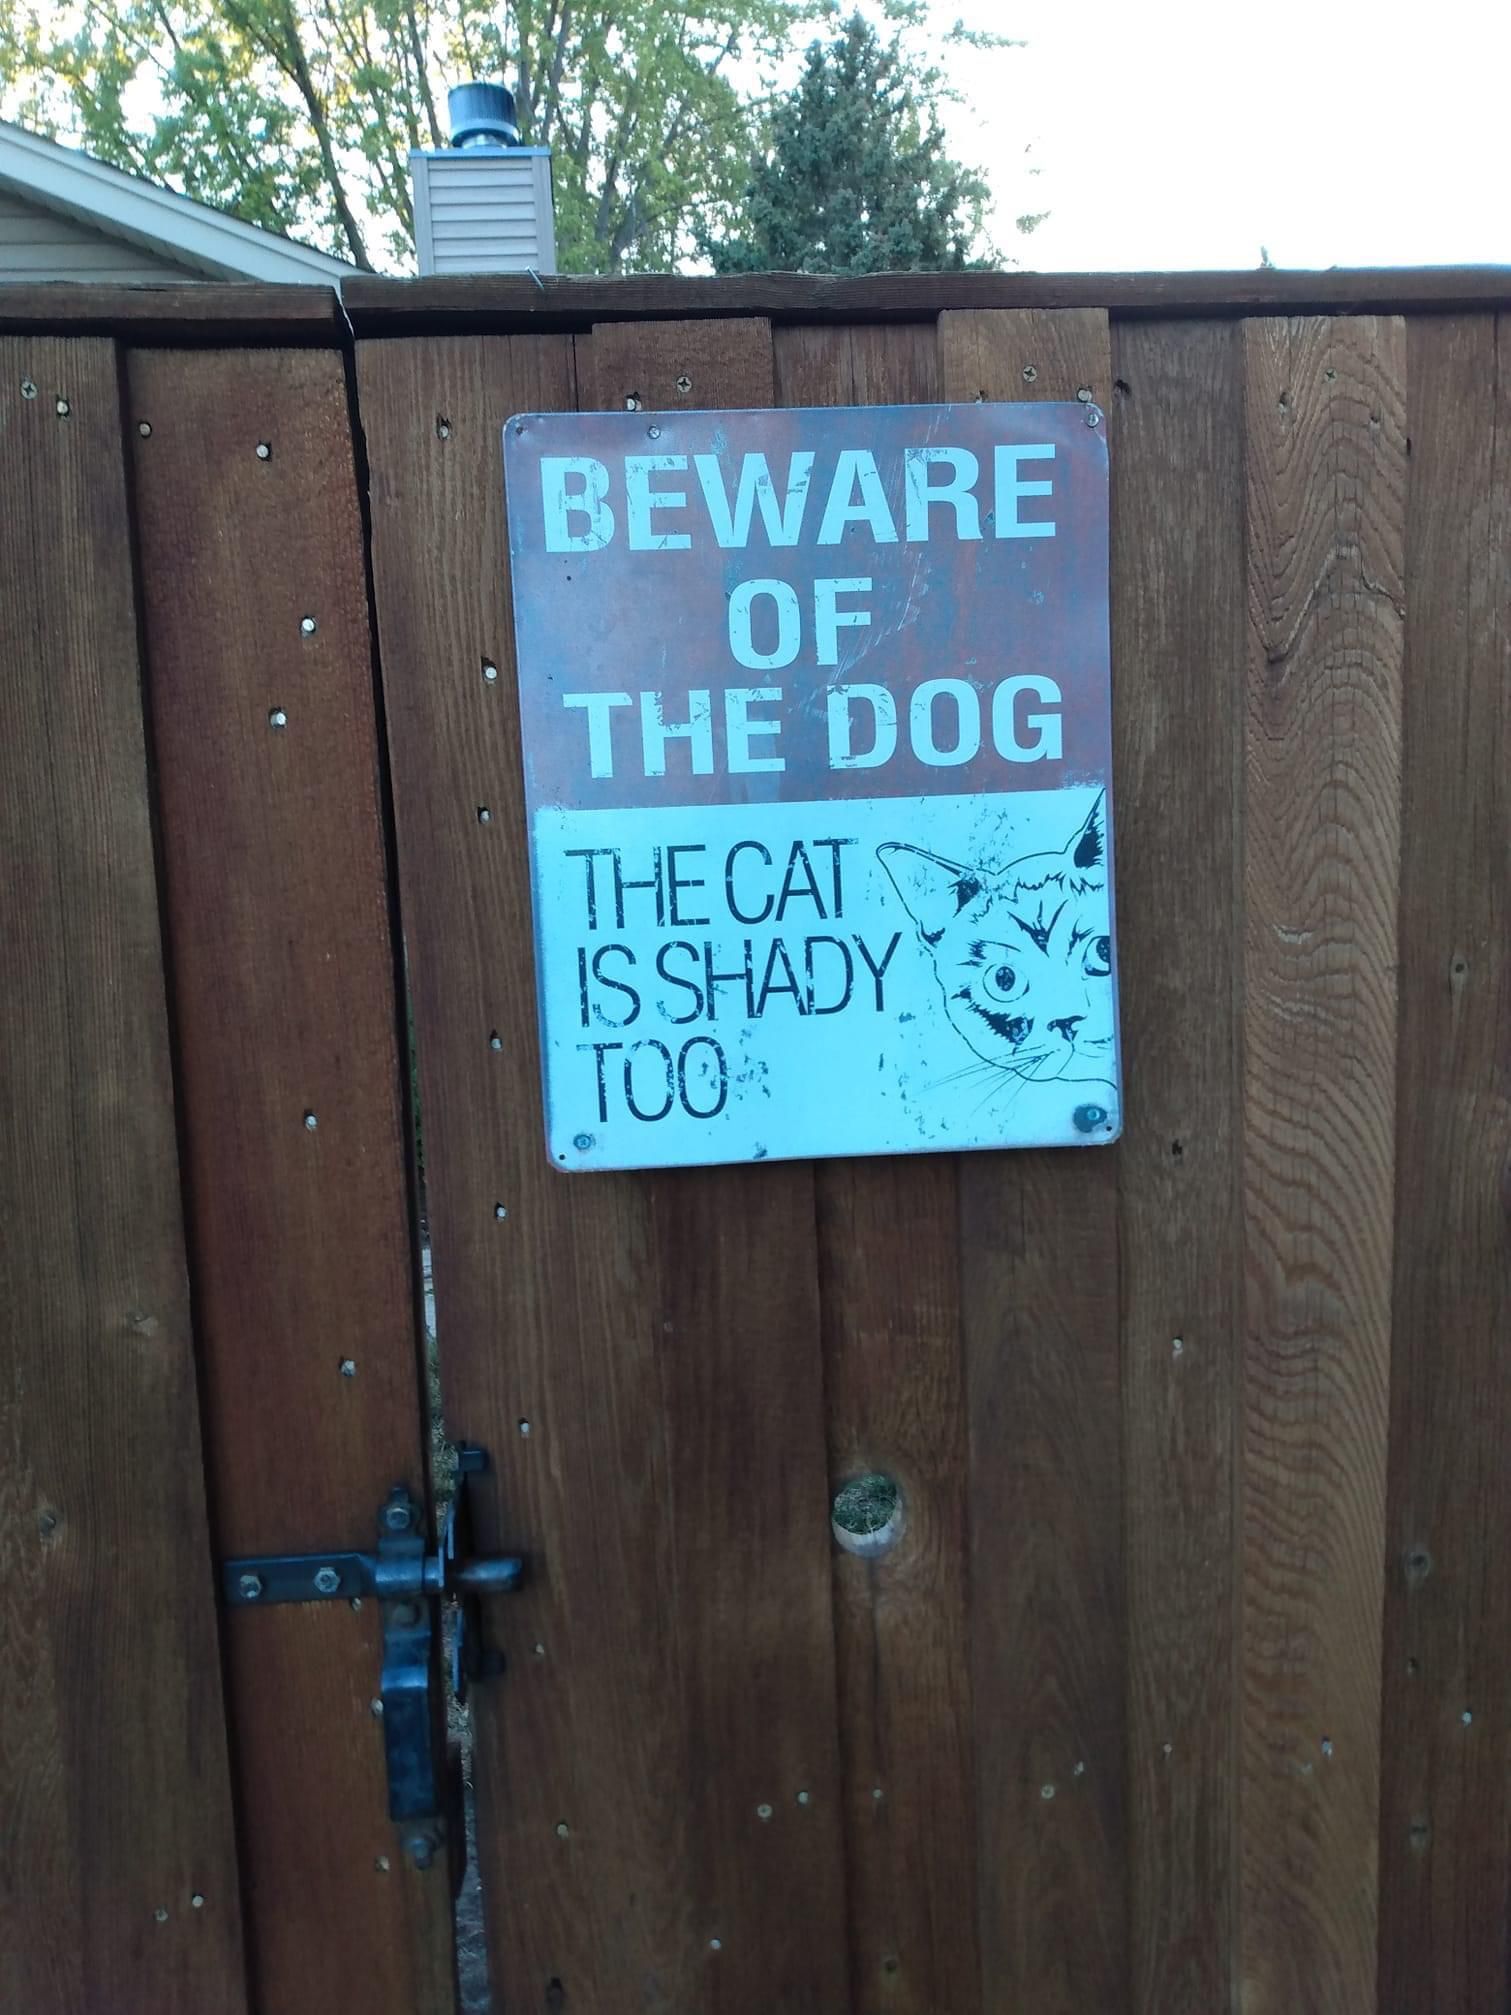 Seen by a friend while she was out on a walk...